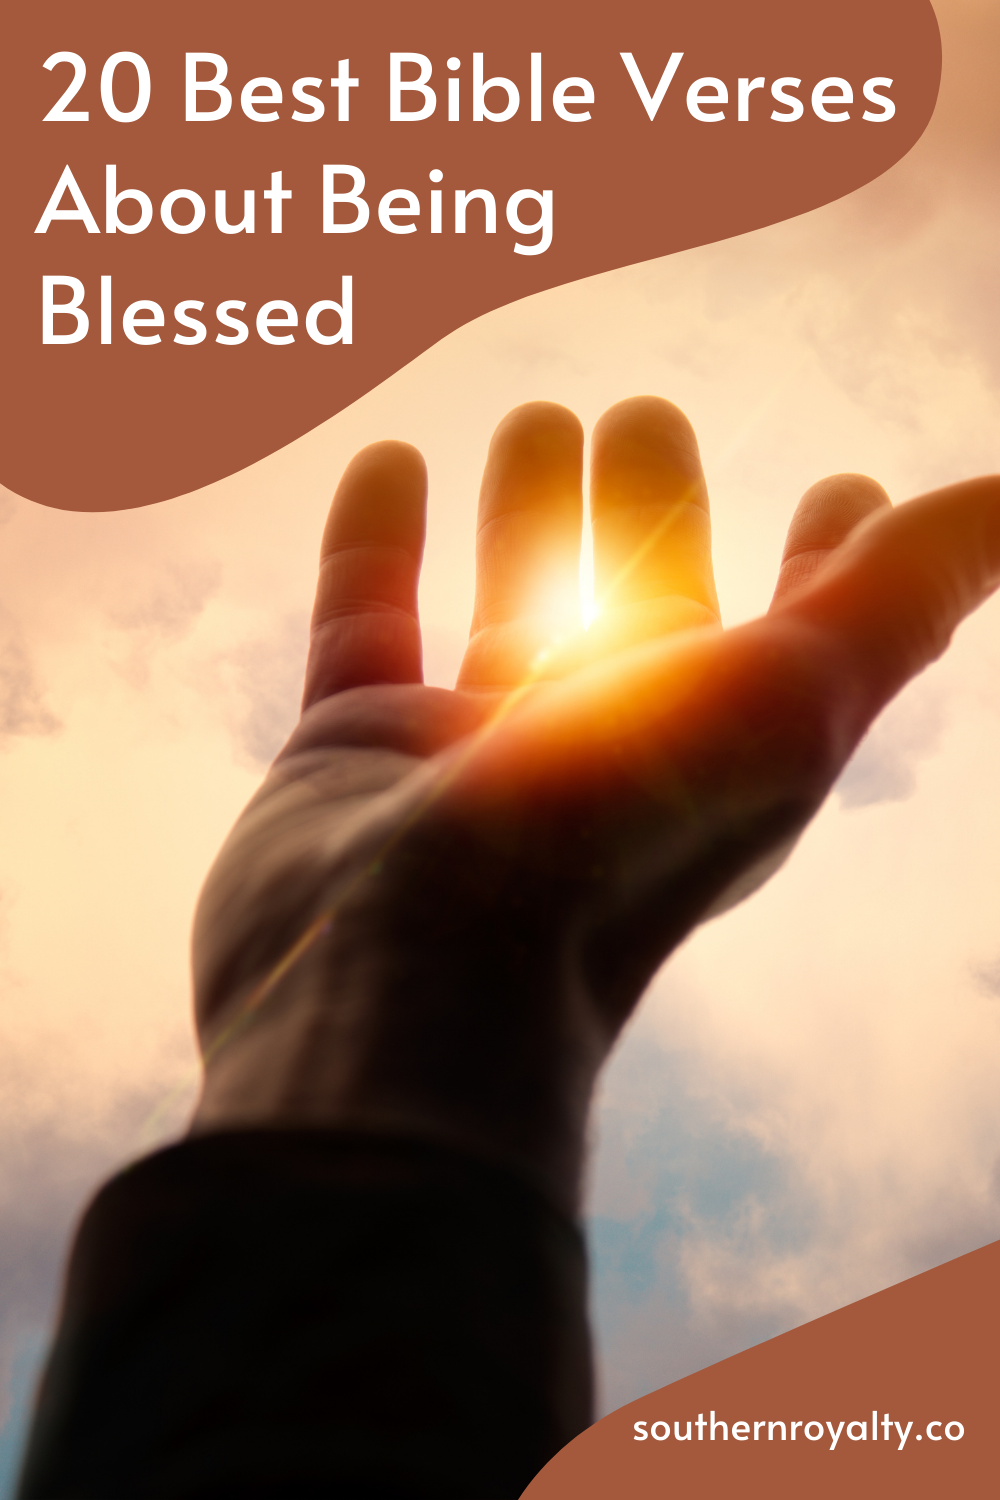 20 Best Bible Verses Scripture About Being Blessed